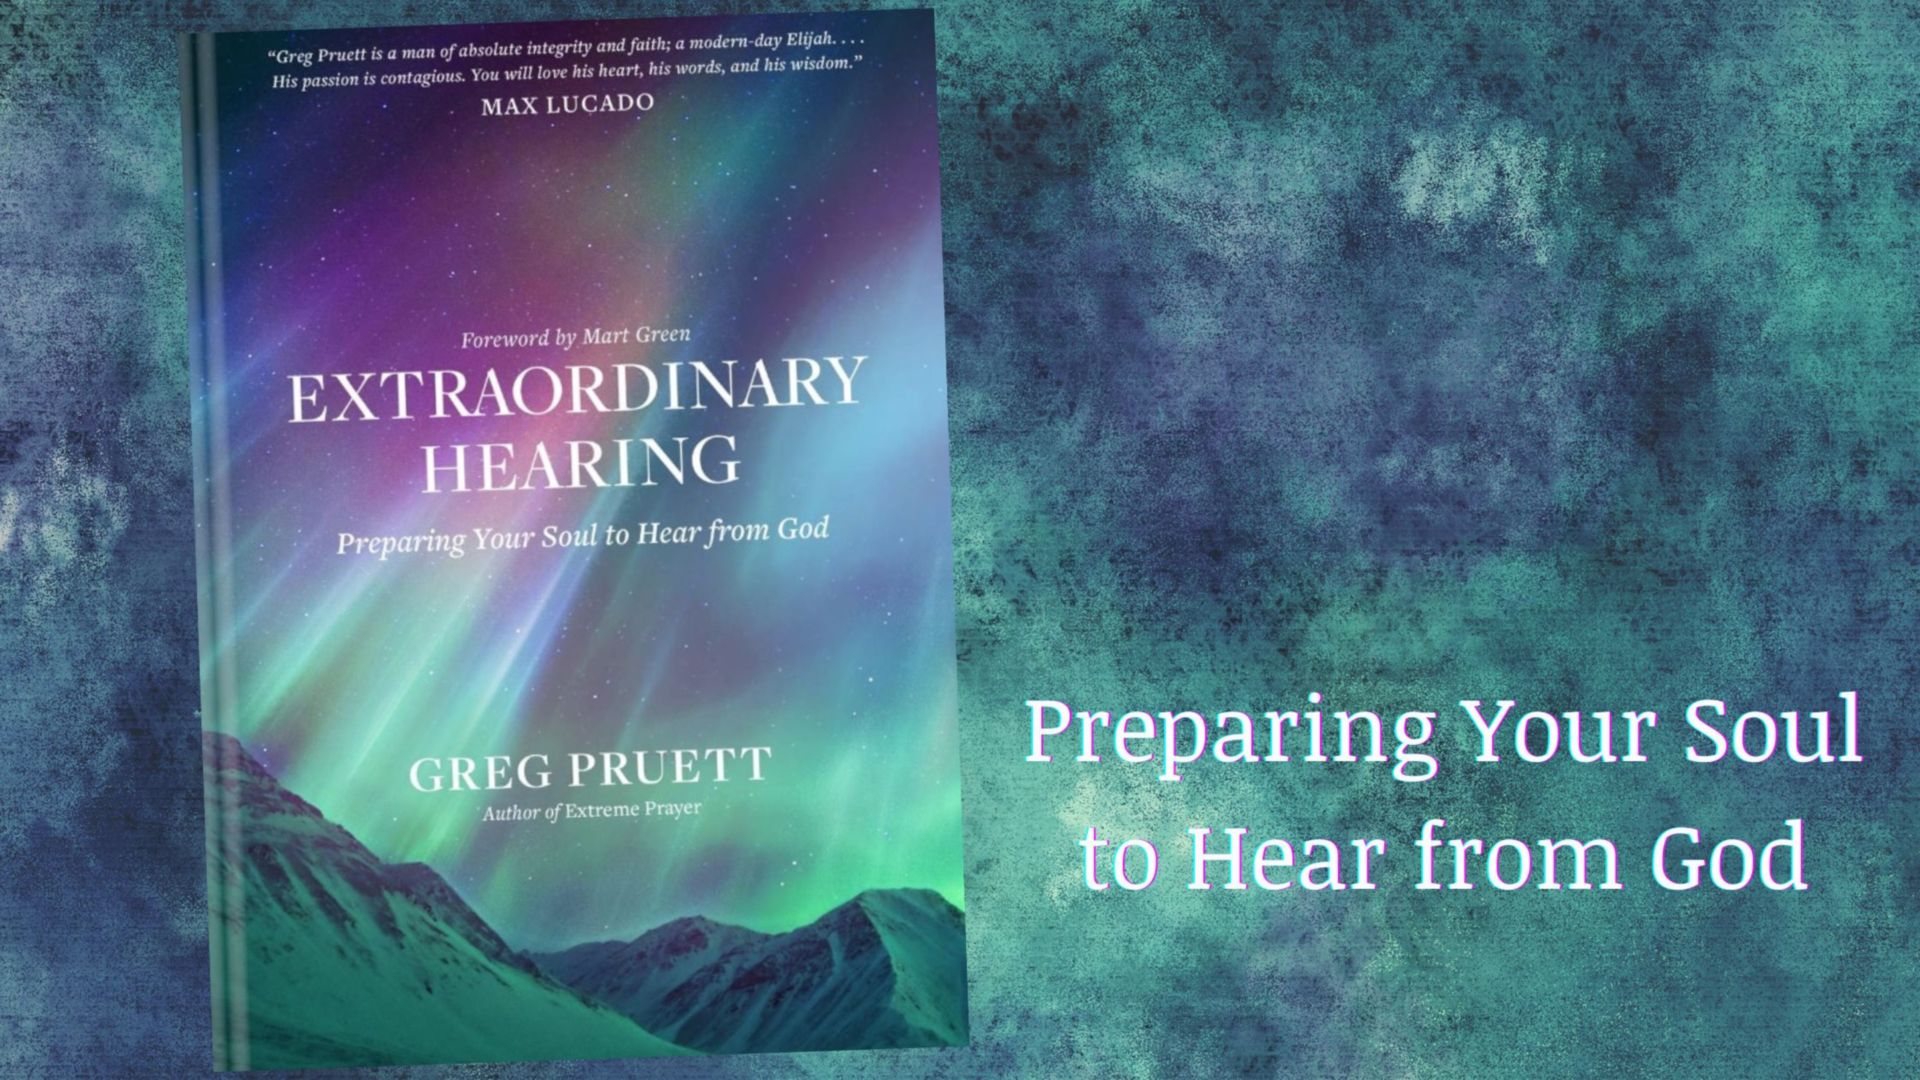 Review of the book 'Extraordinary Hearing' by Greg Pruett